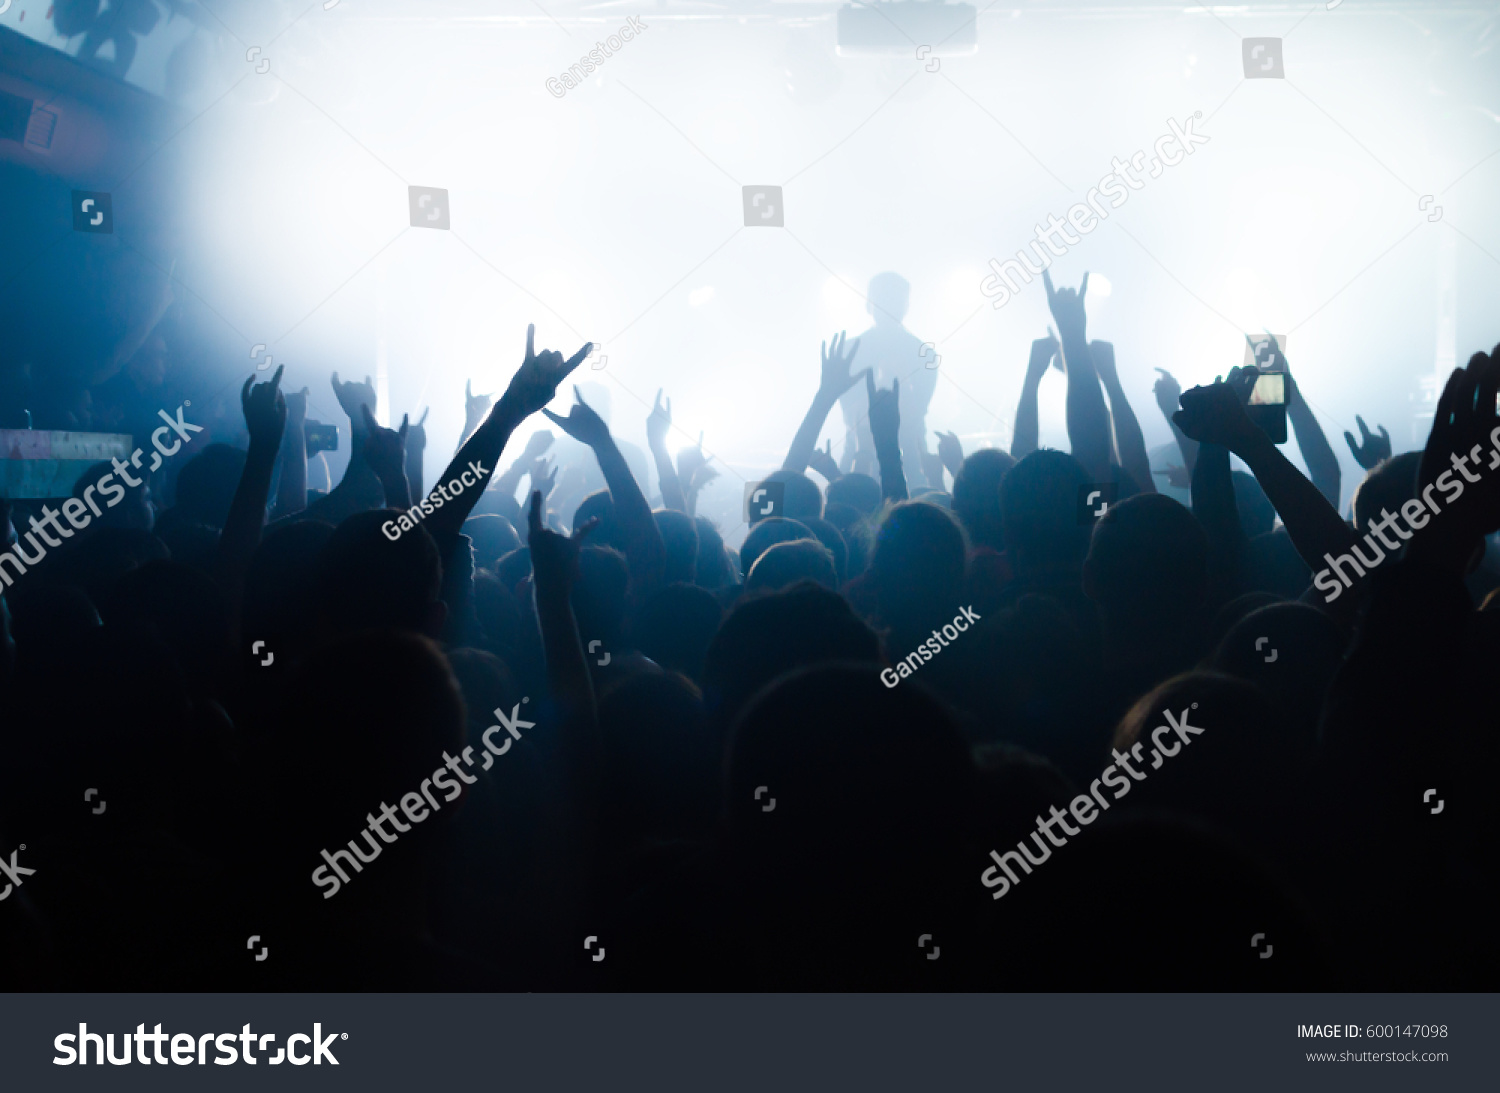 silhouettes of people at a rock festival concert in front of the scene in bright light #600147098